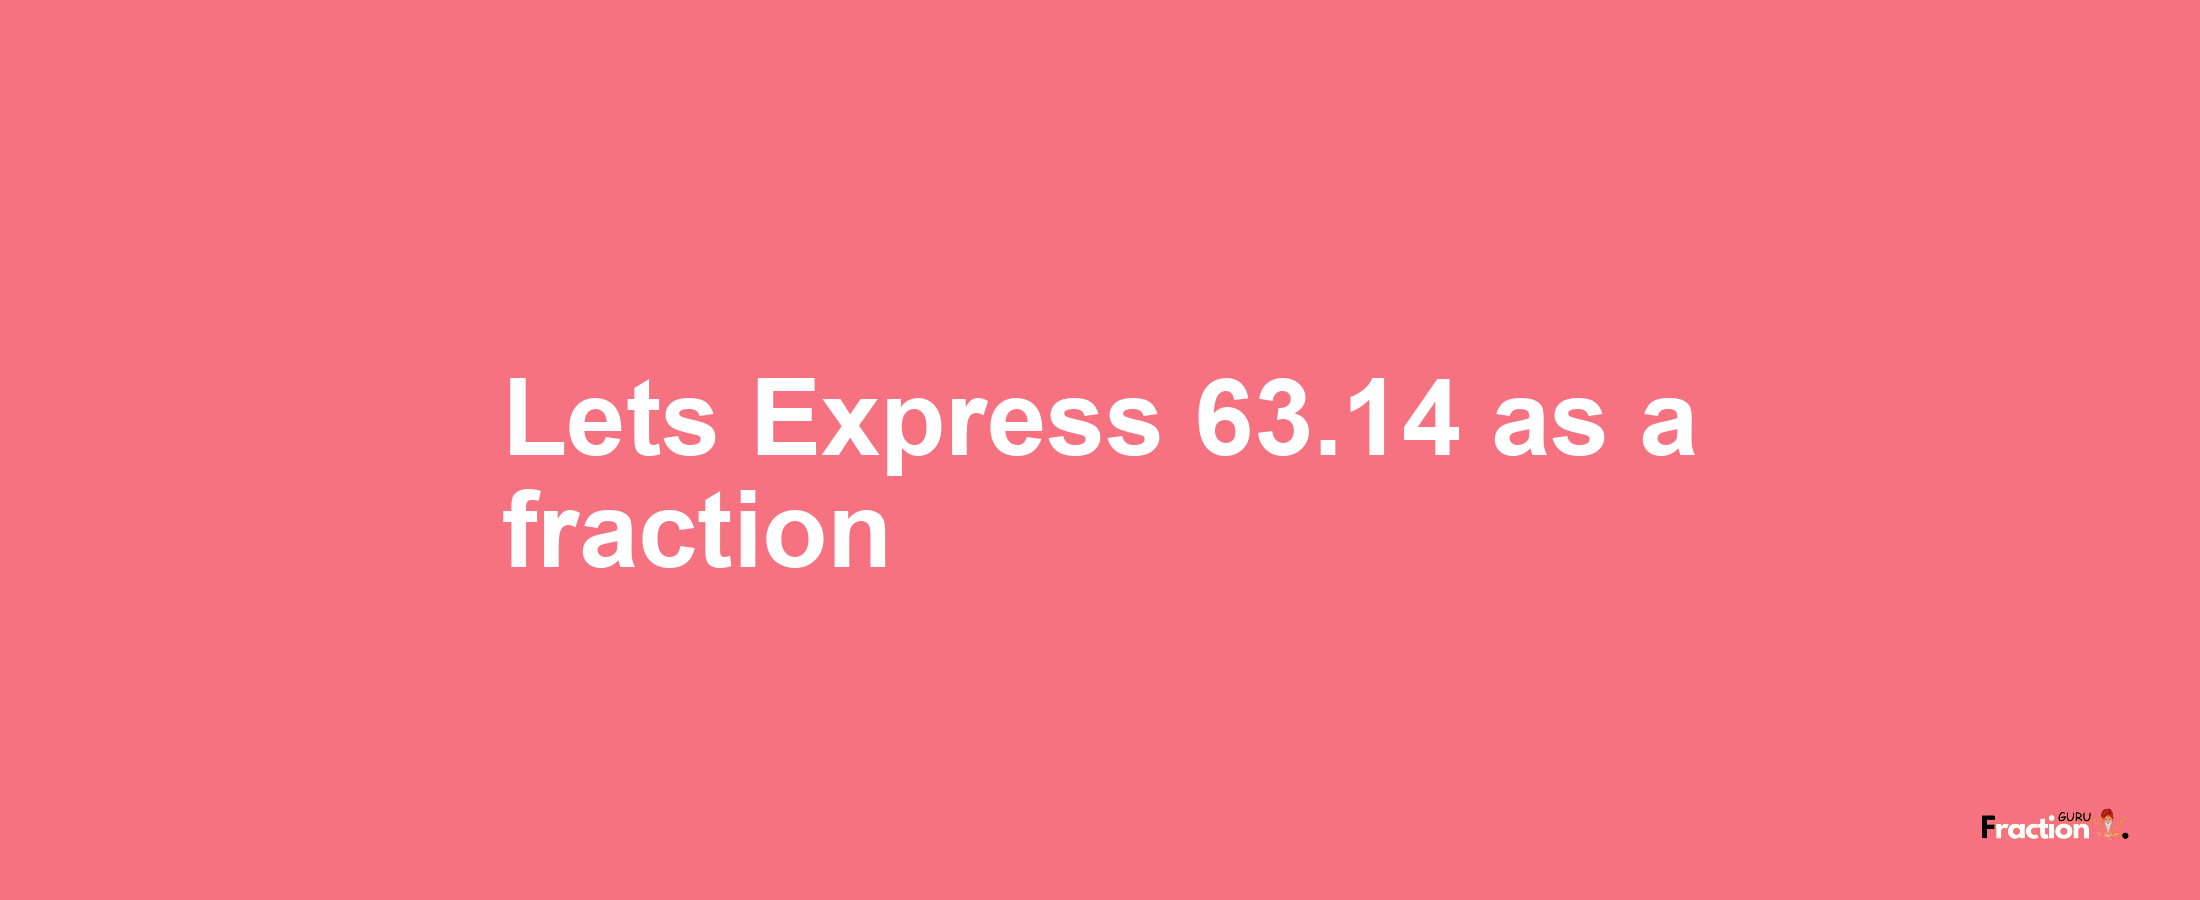 Lets Express 63.14 as afraction